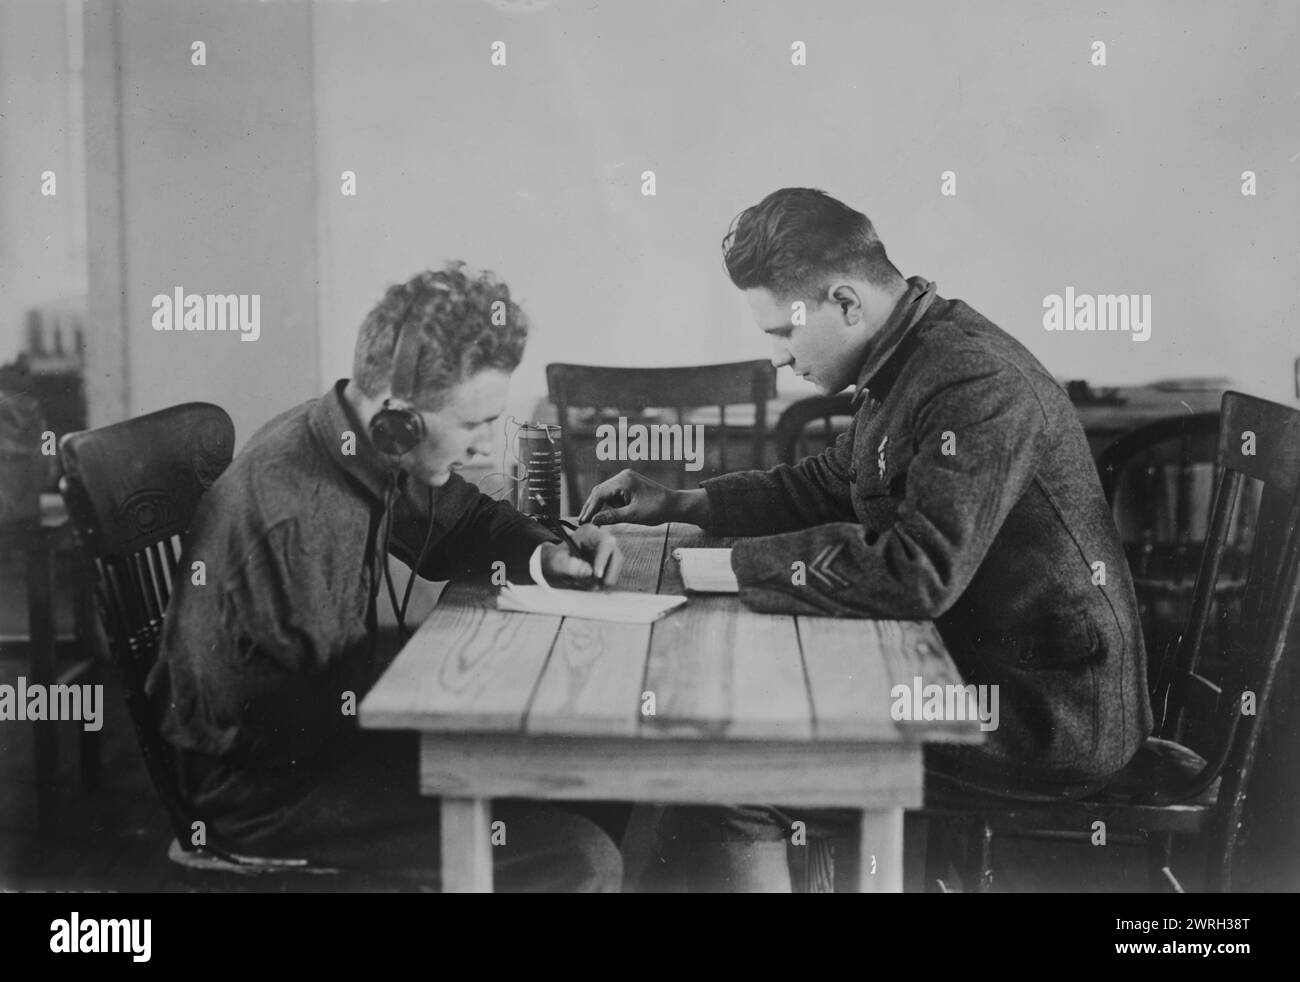 Telegraph lesson - crippled soldiers, 06 Feb 1919. Two soldiers, amputee veterans of World War I, leaning to use a telegraph at a vocational school for wounded soldiers at Walter Reed Hospital, Washington, D.C. One soldier lost an arm and the other a hand. Stock Photo